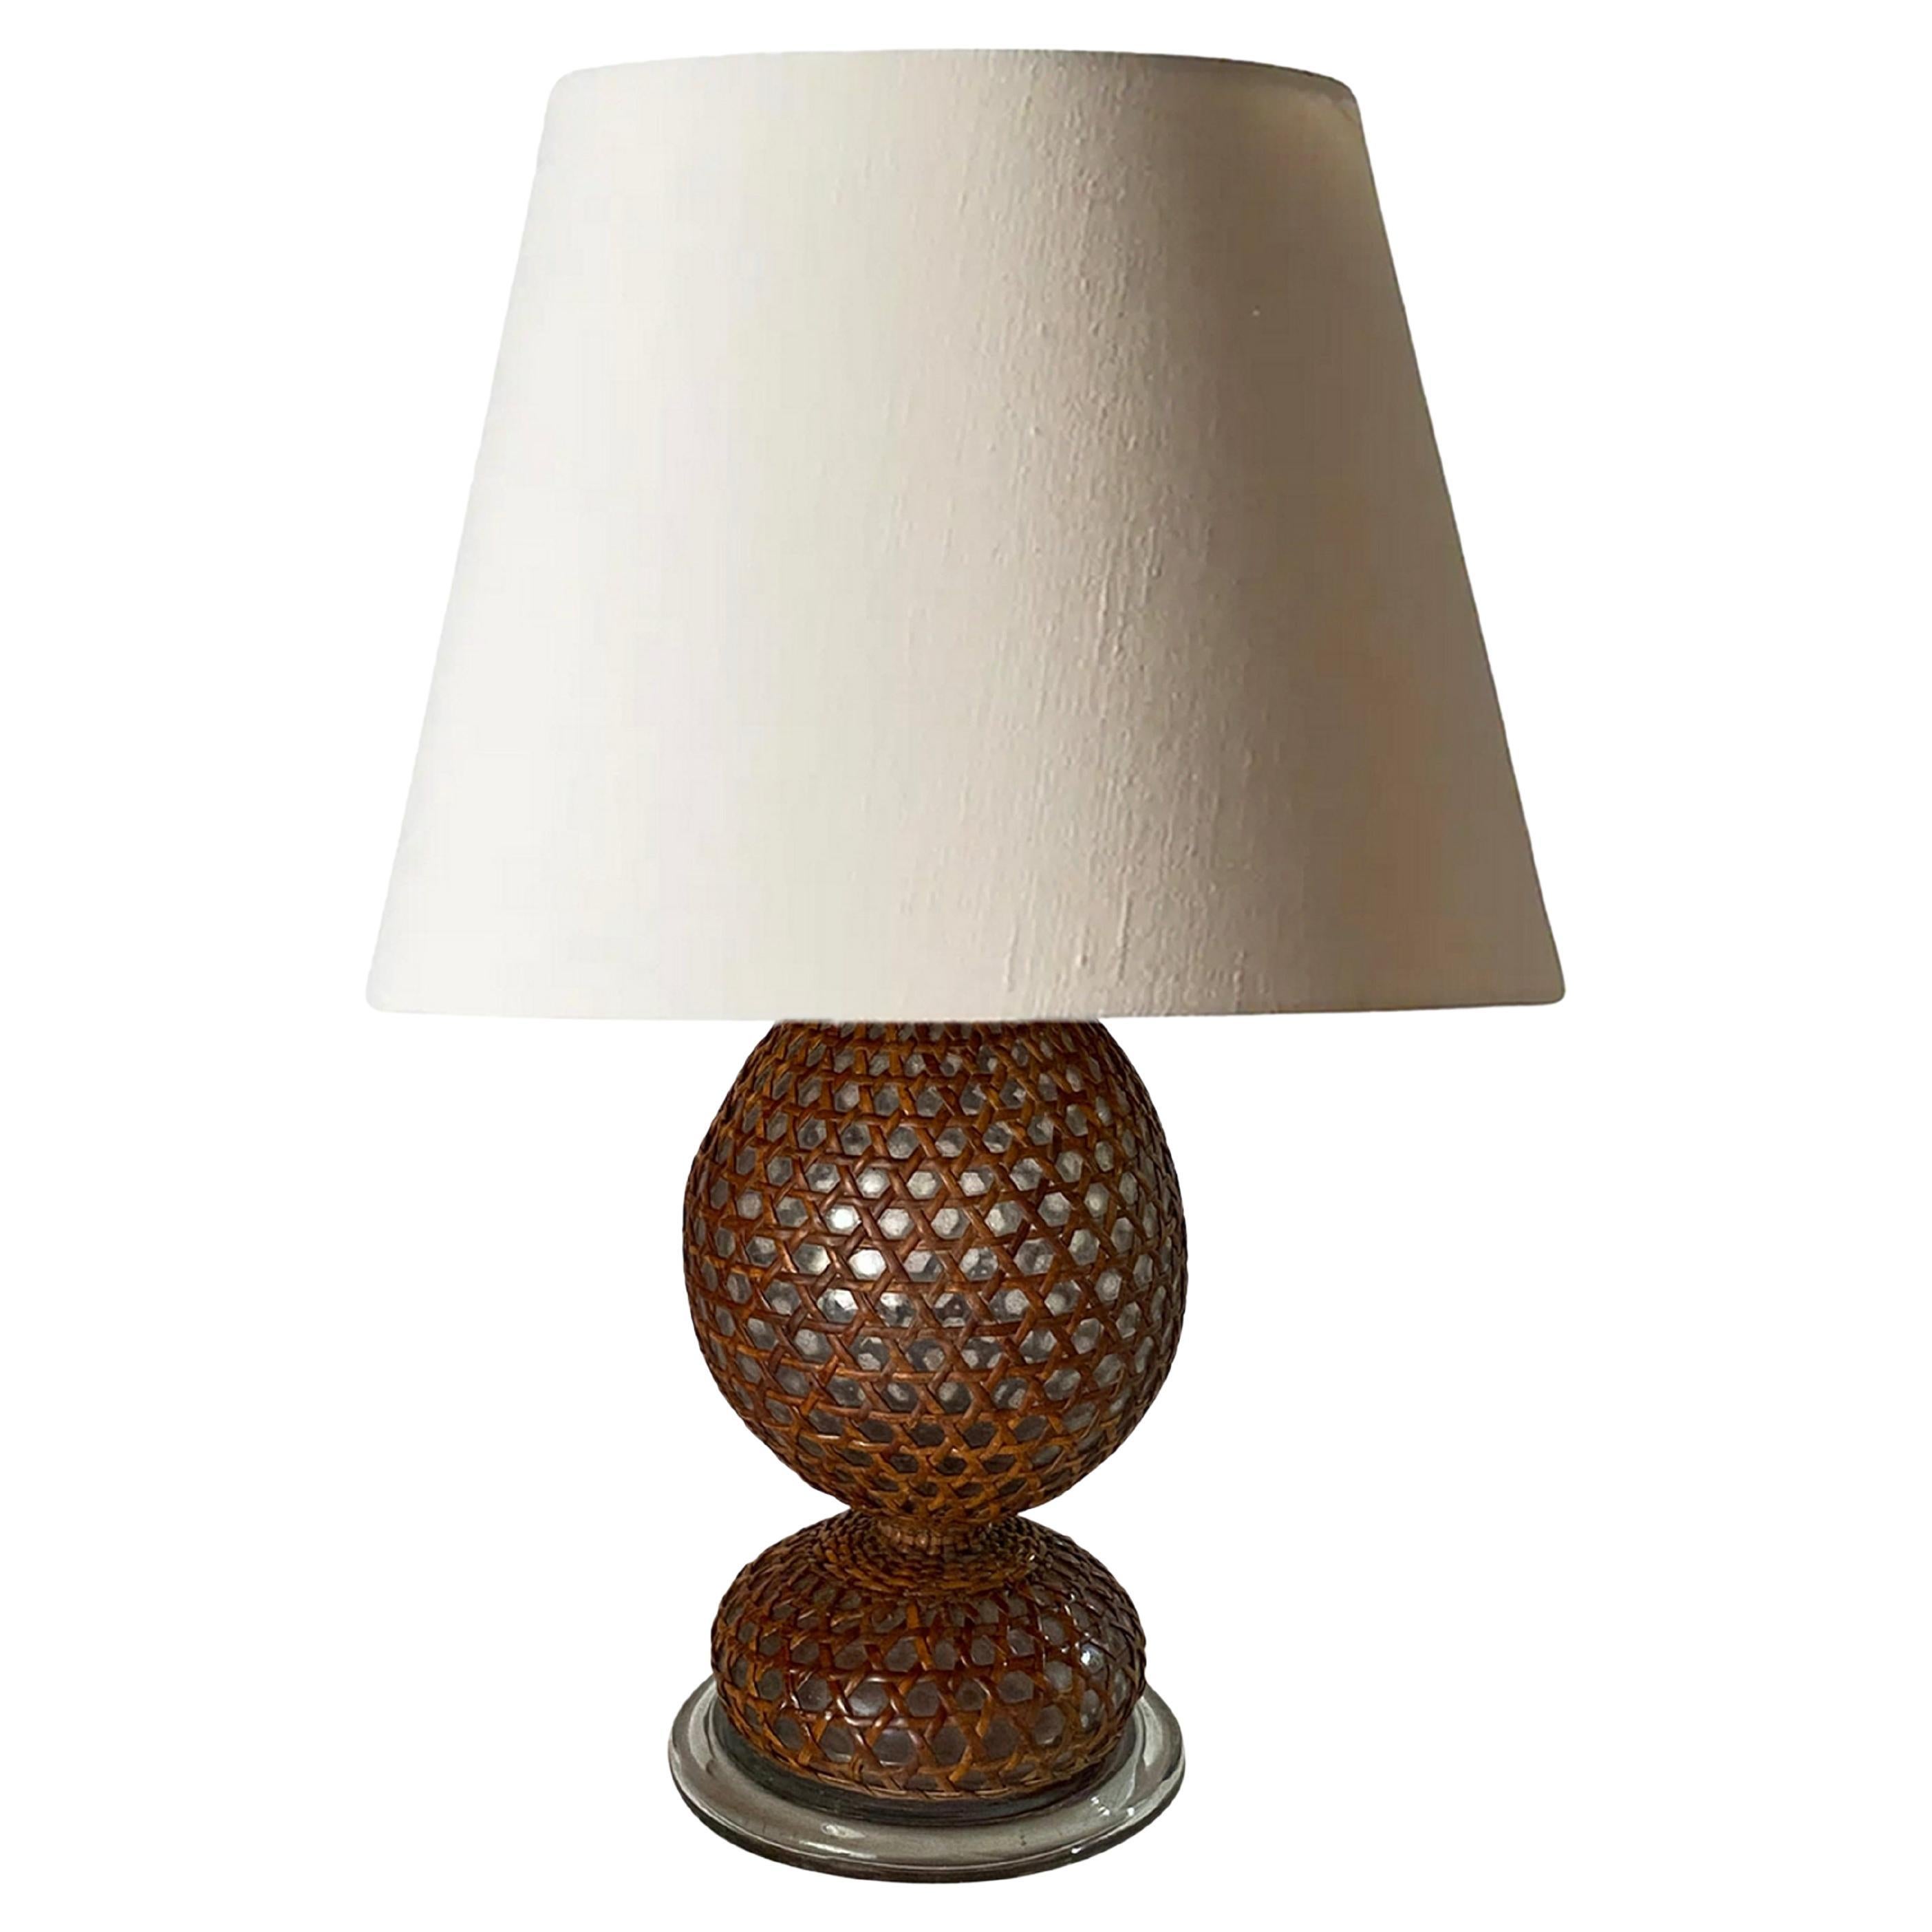 Glass and Rattan Table Lamp, Made in England, Brown Color, Circa 1970 For Sale